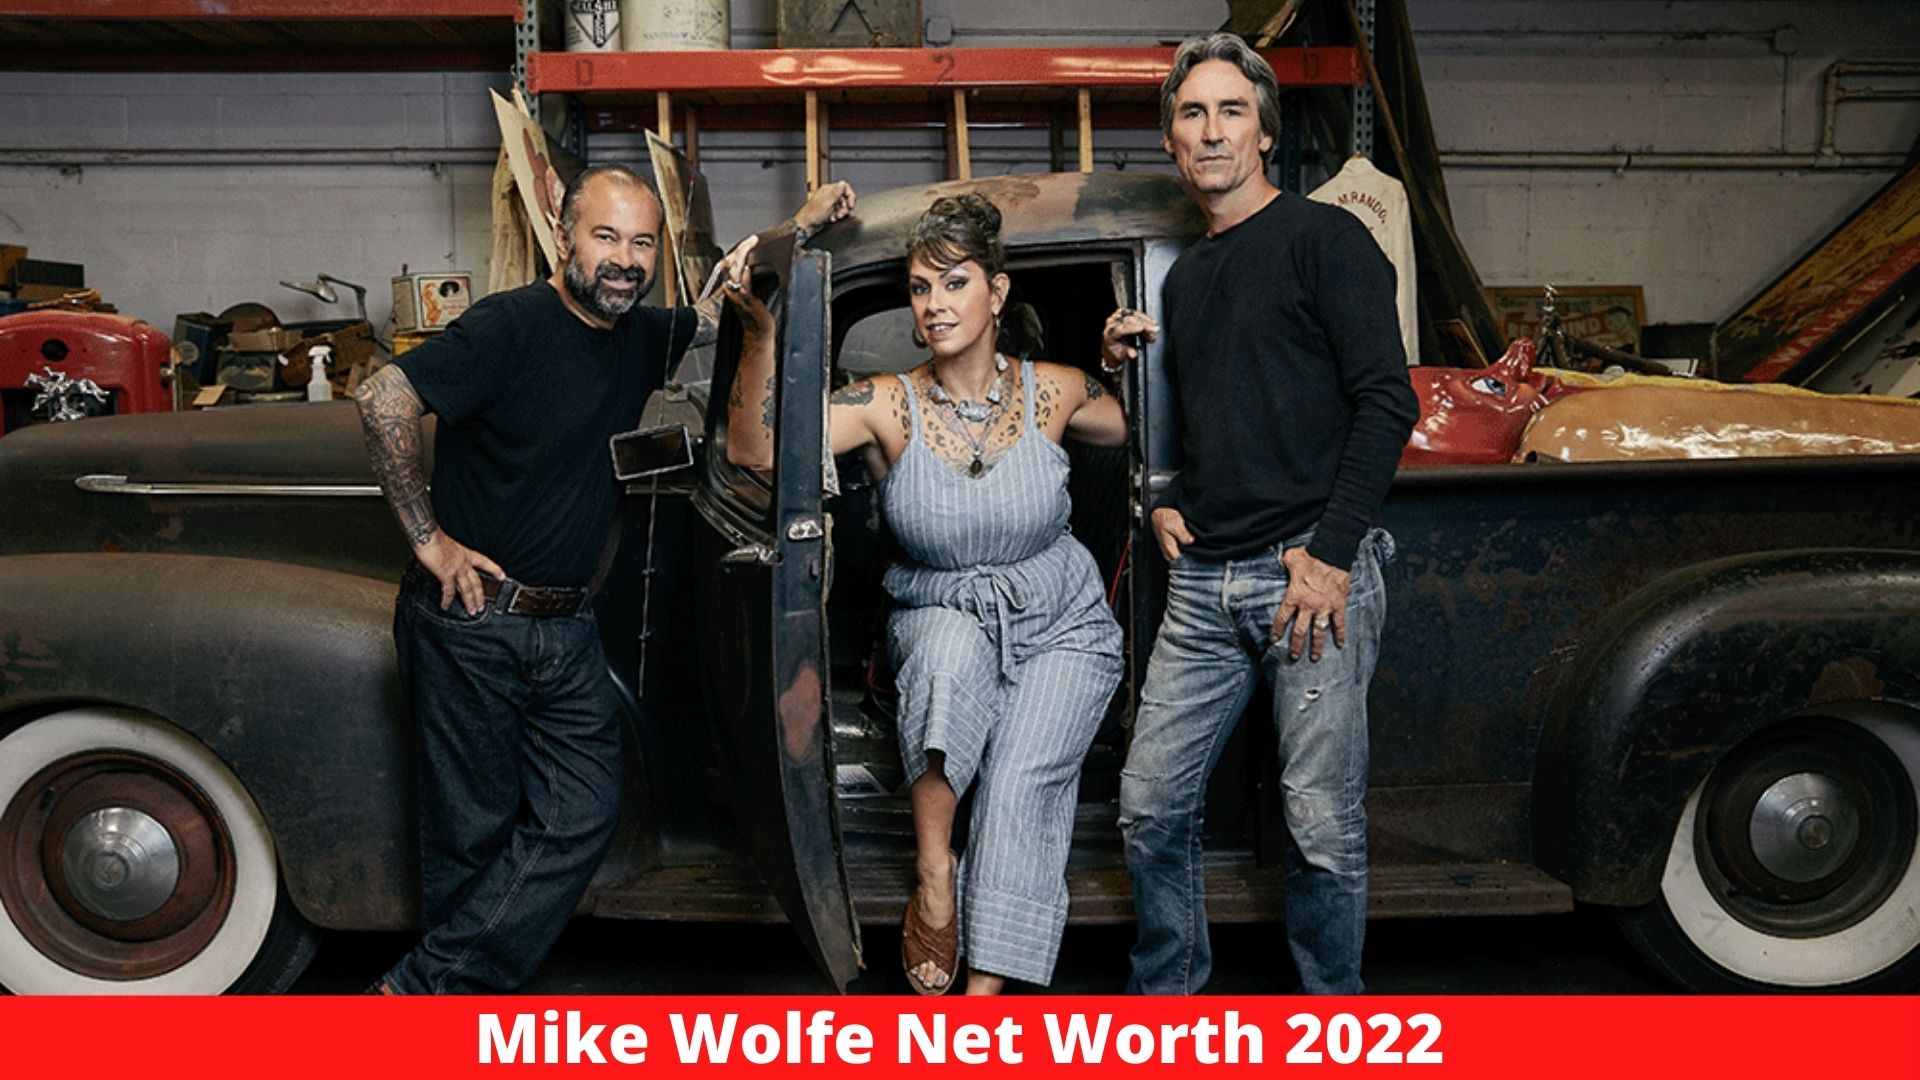 Mike Wolfe Net Worth 2022 – Inside American Pickers star Mike Wolfe’s $3.4M real estate empire